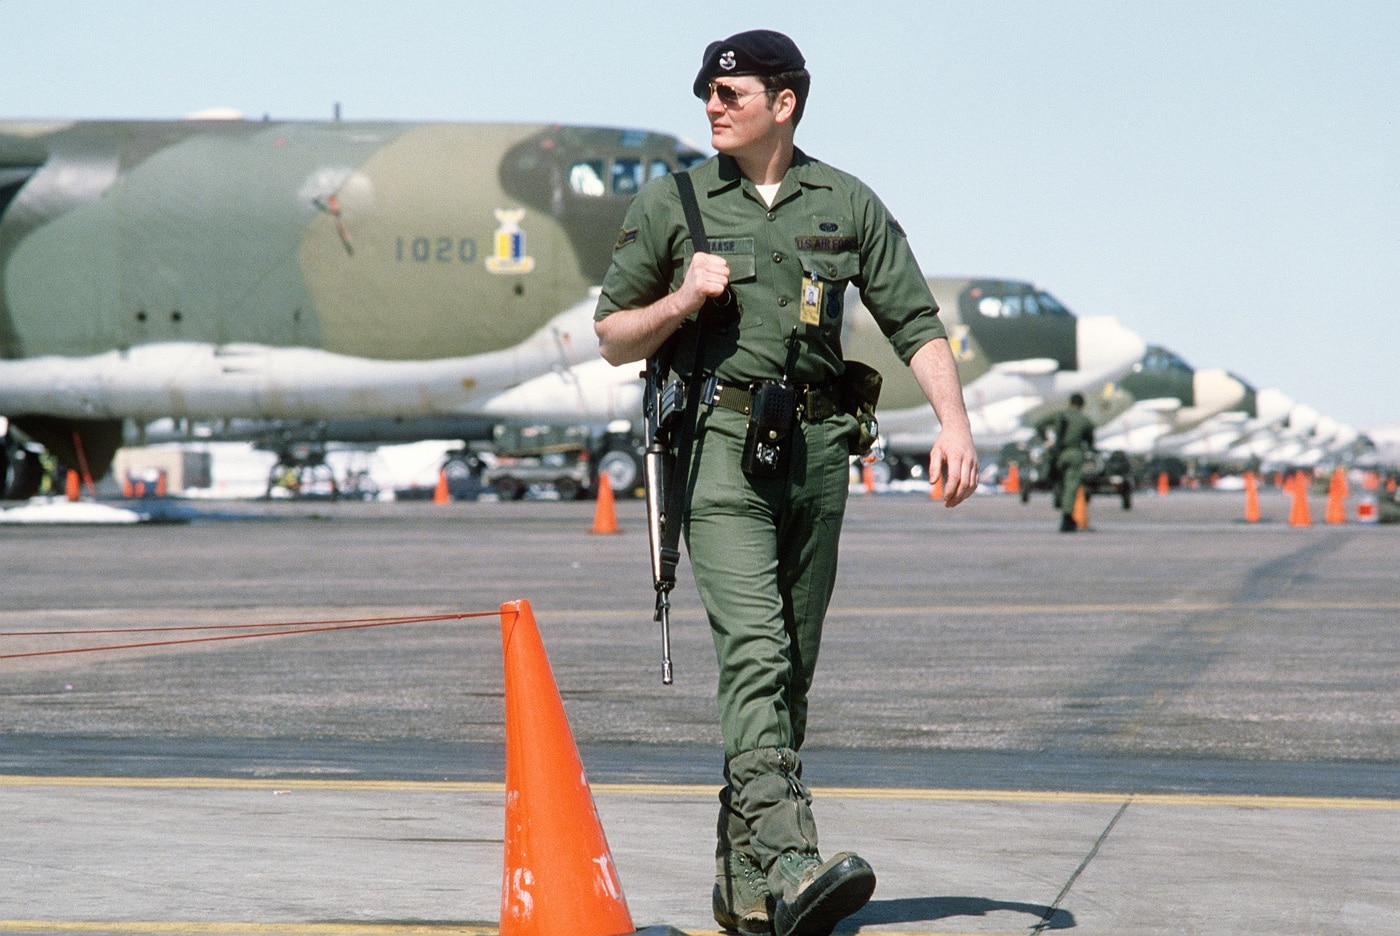 airman with m16 guards line of alert b-52 bombers